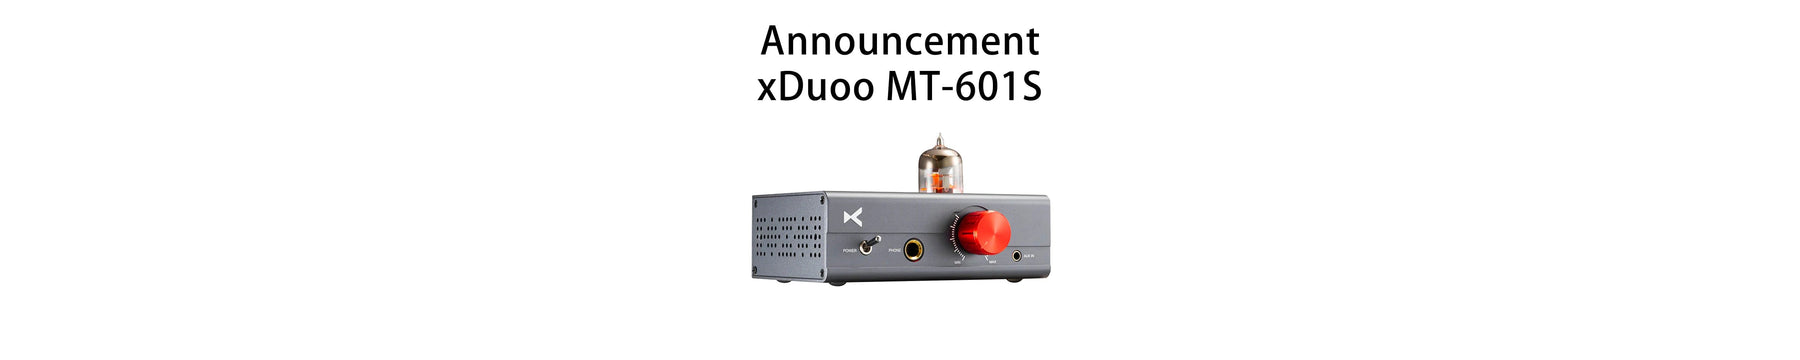 xDuoo Introduces MT-601S: Brand New Tube+Class A Transistor Headphone Amplifier